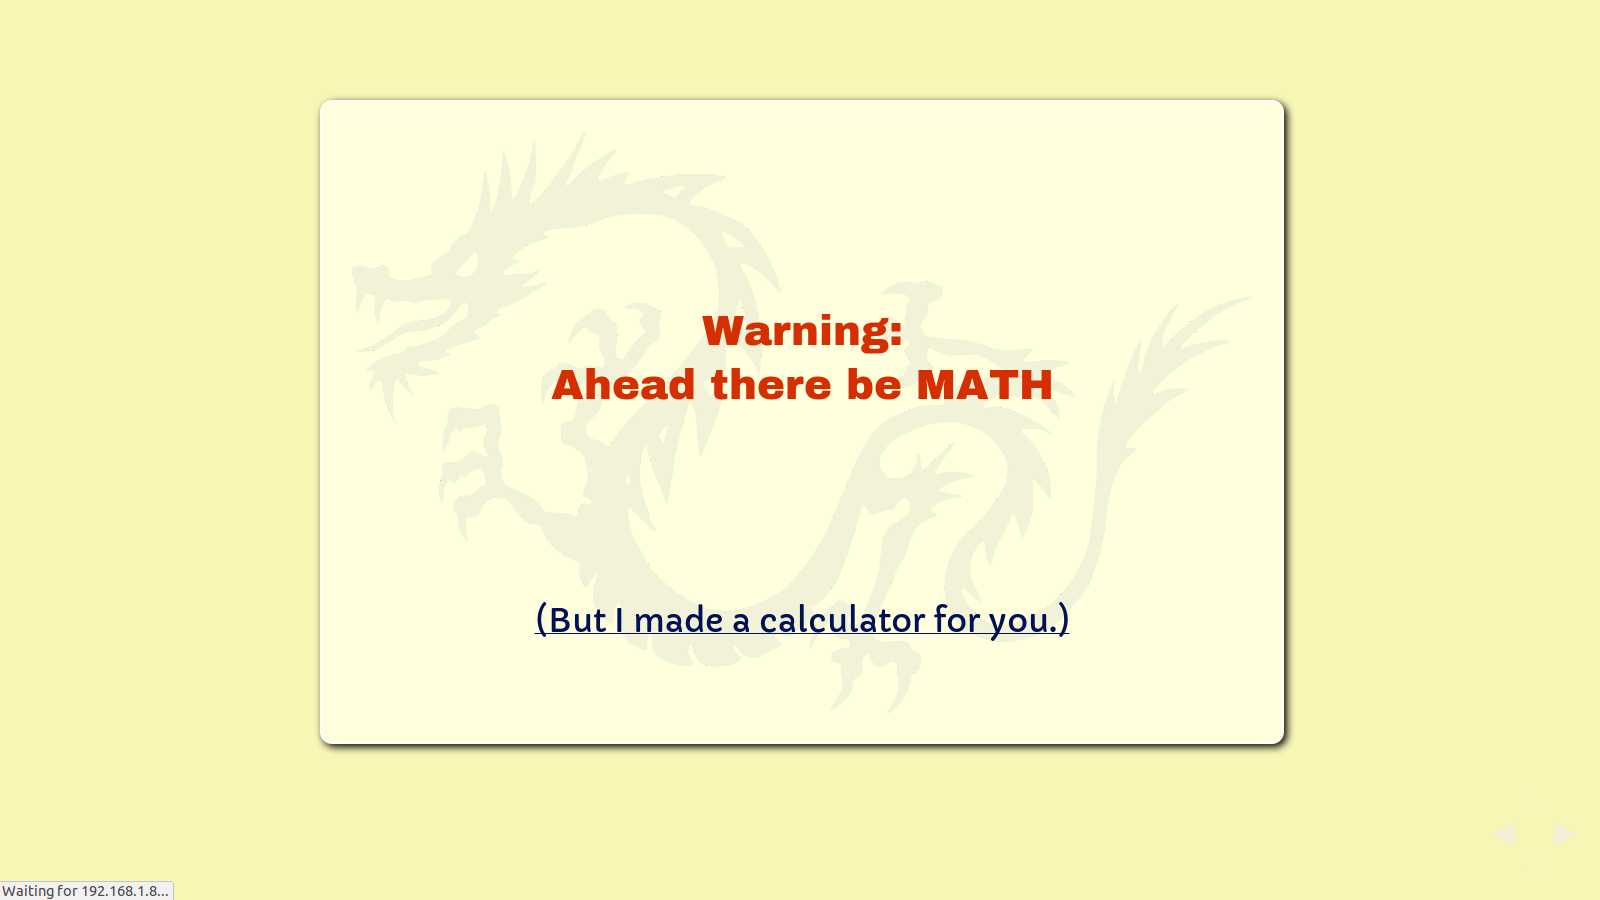 Slide: Warning, ahead there be MATH